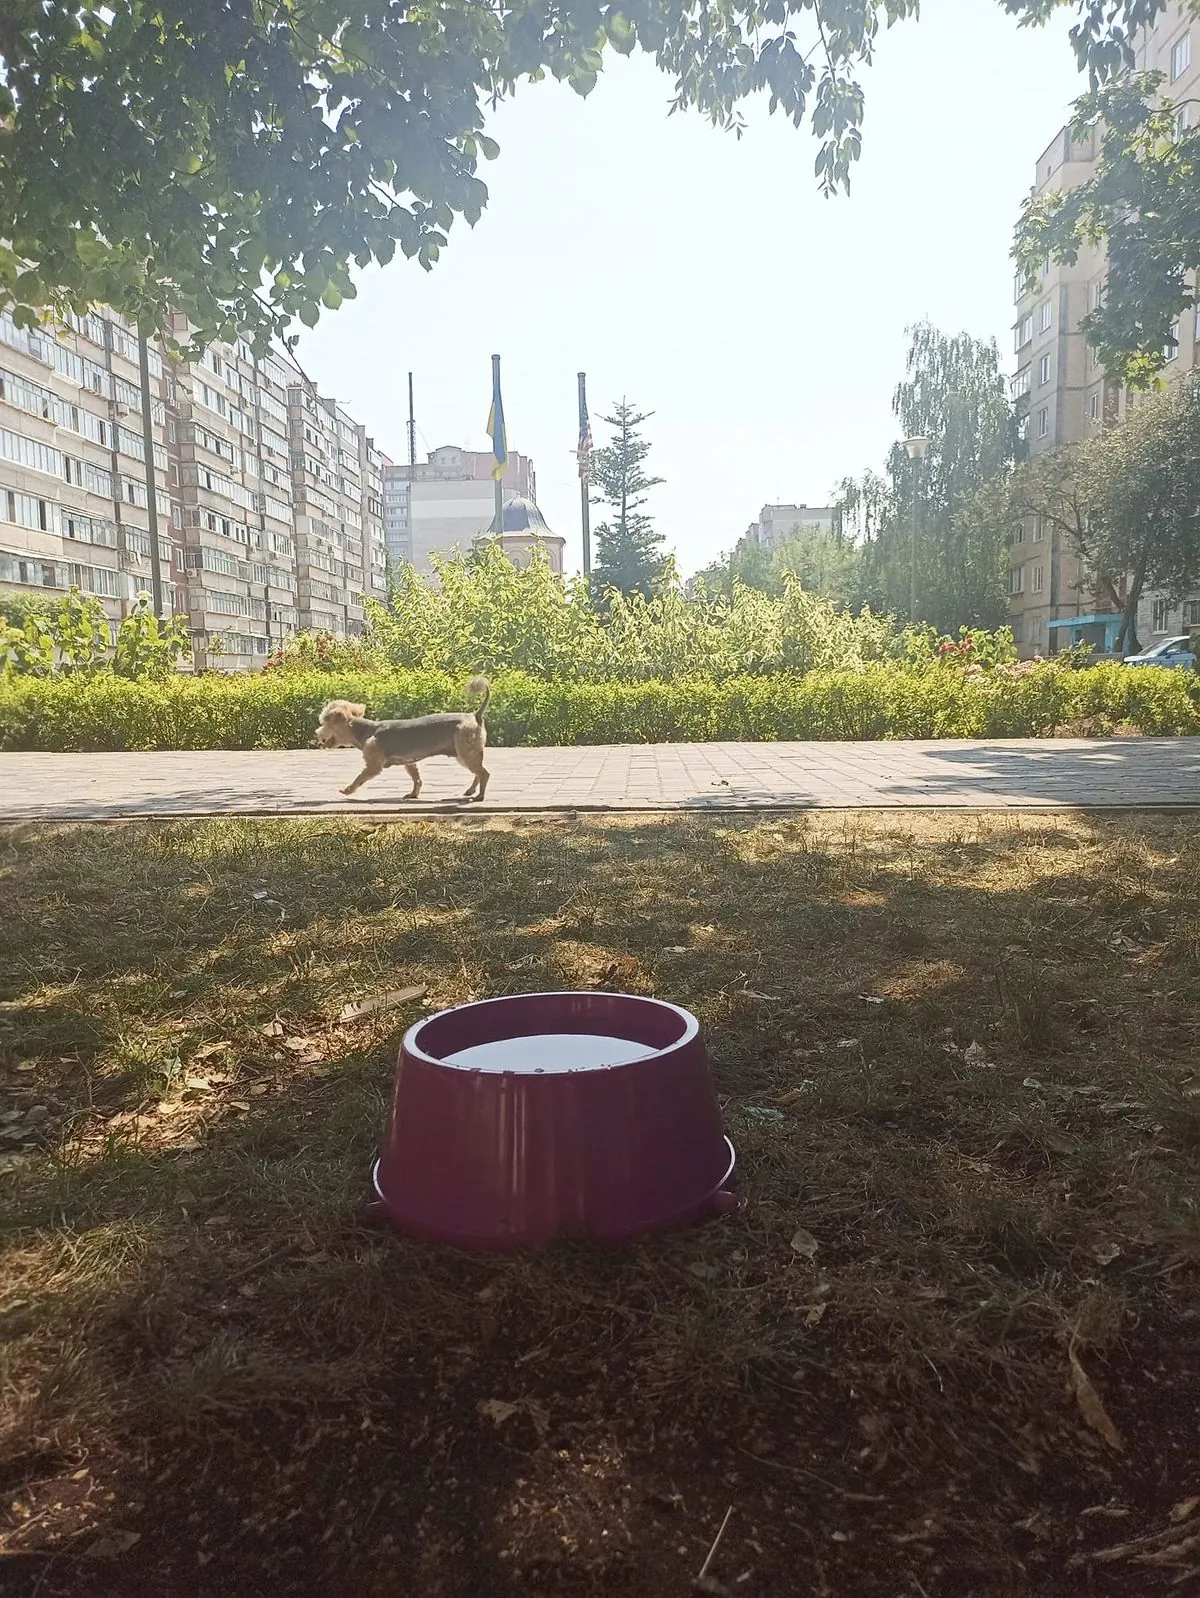 Saving from the heat: water bowls for animals in Brovary parks and squares